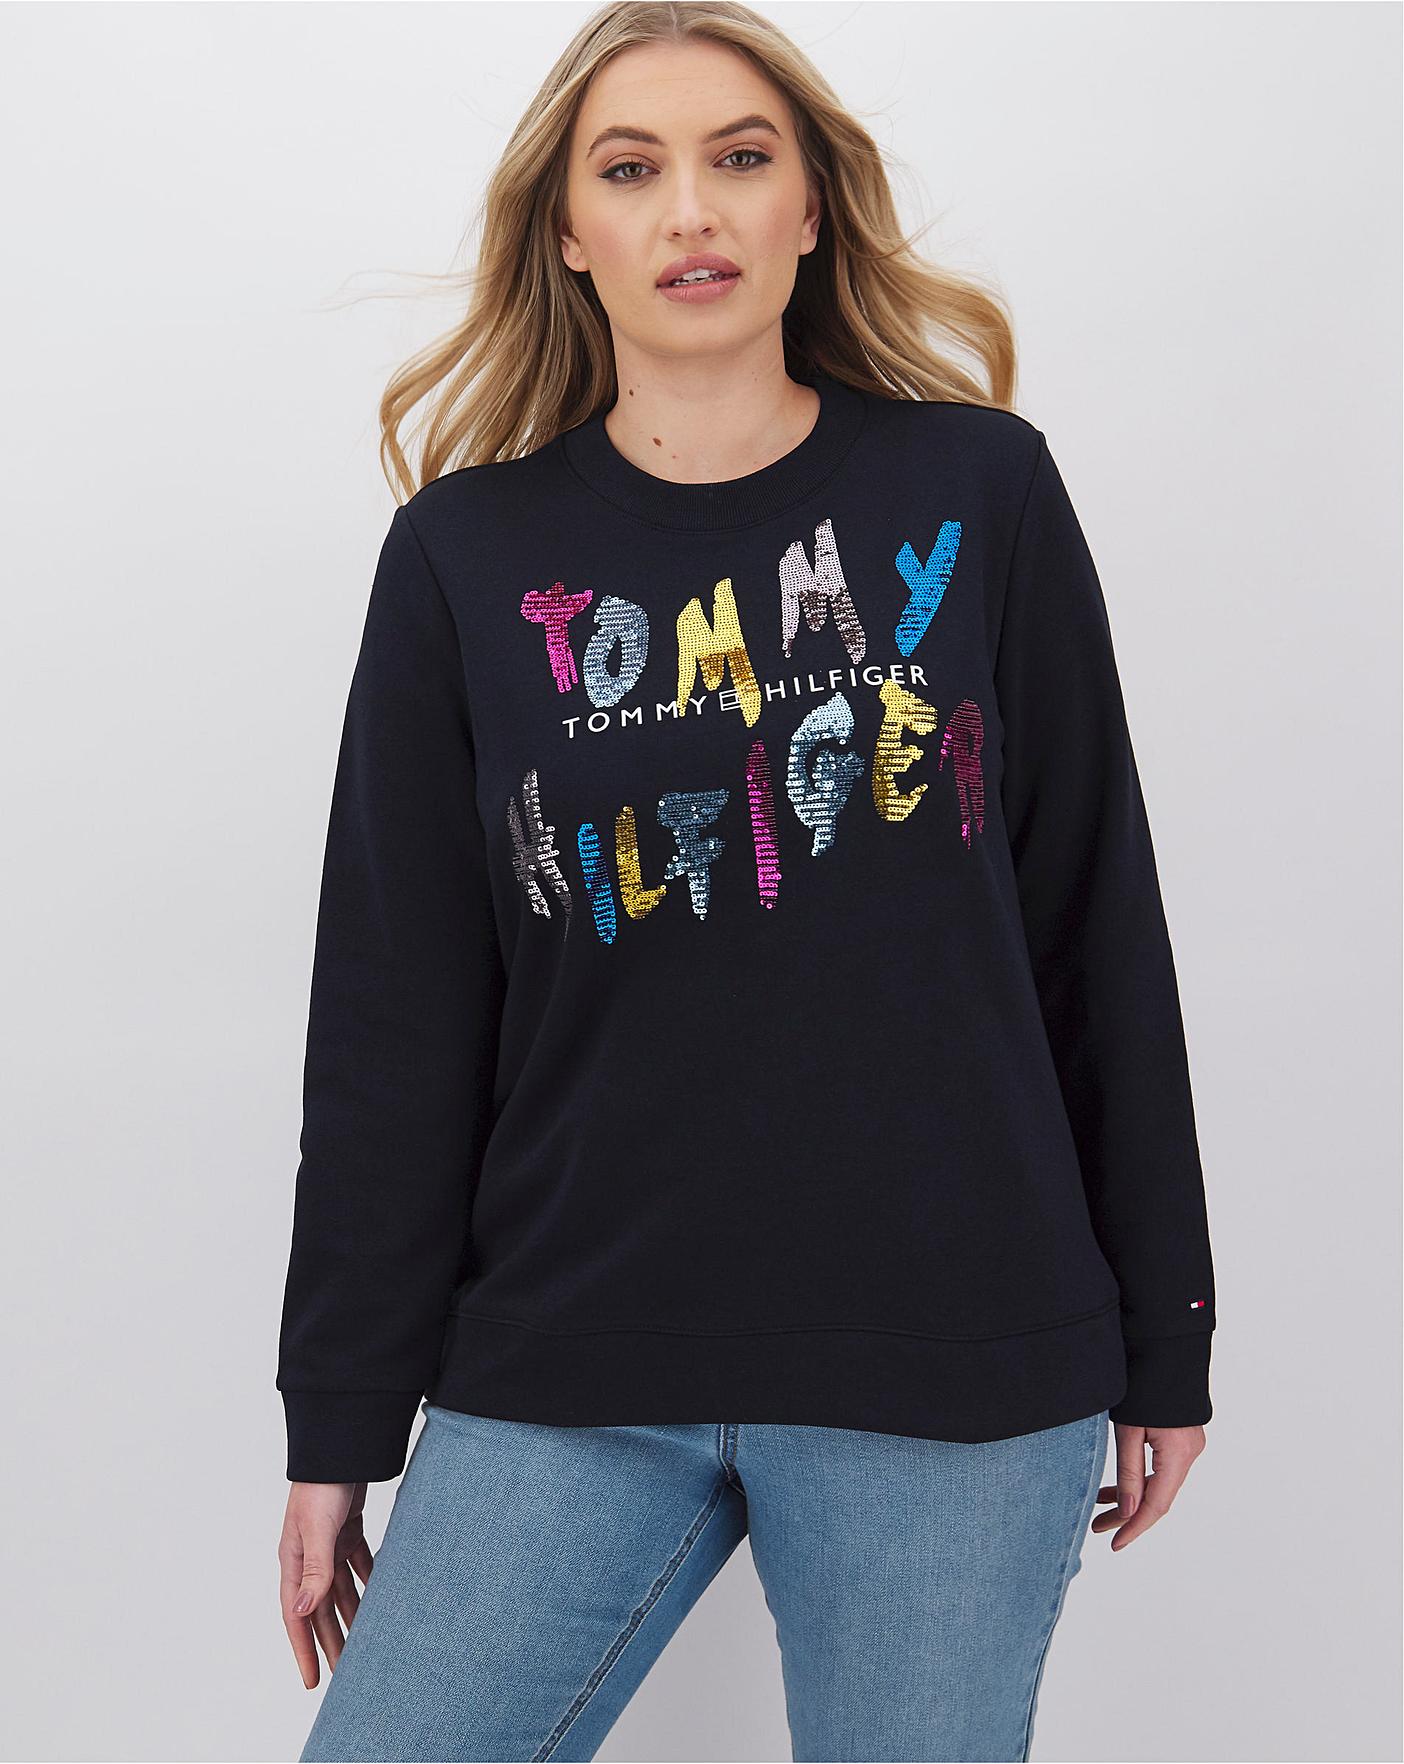 tommy jeans have a nice day sweatshirt